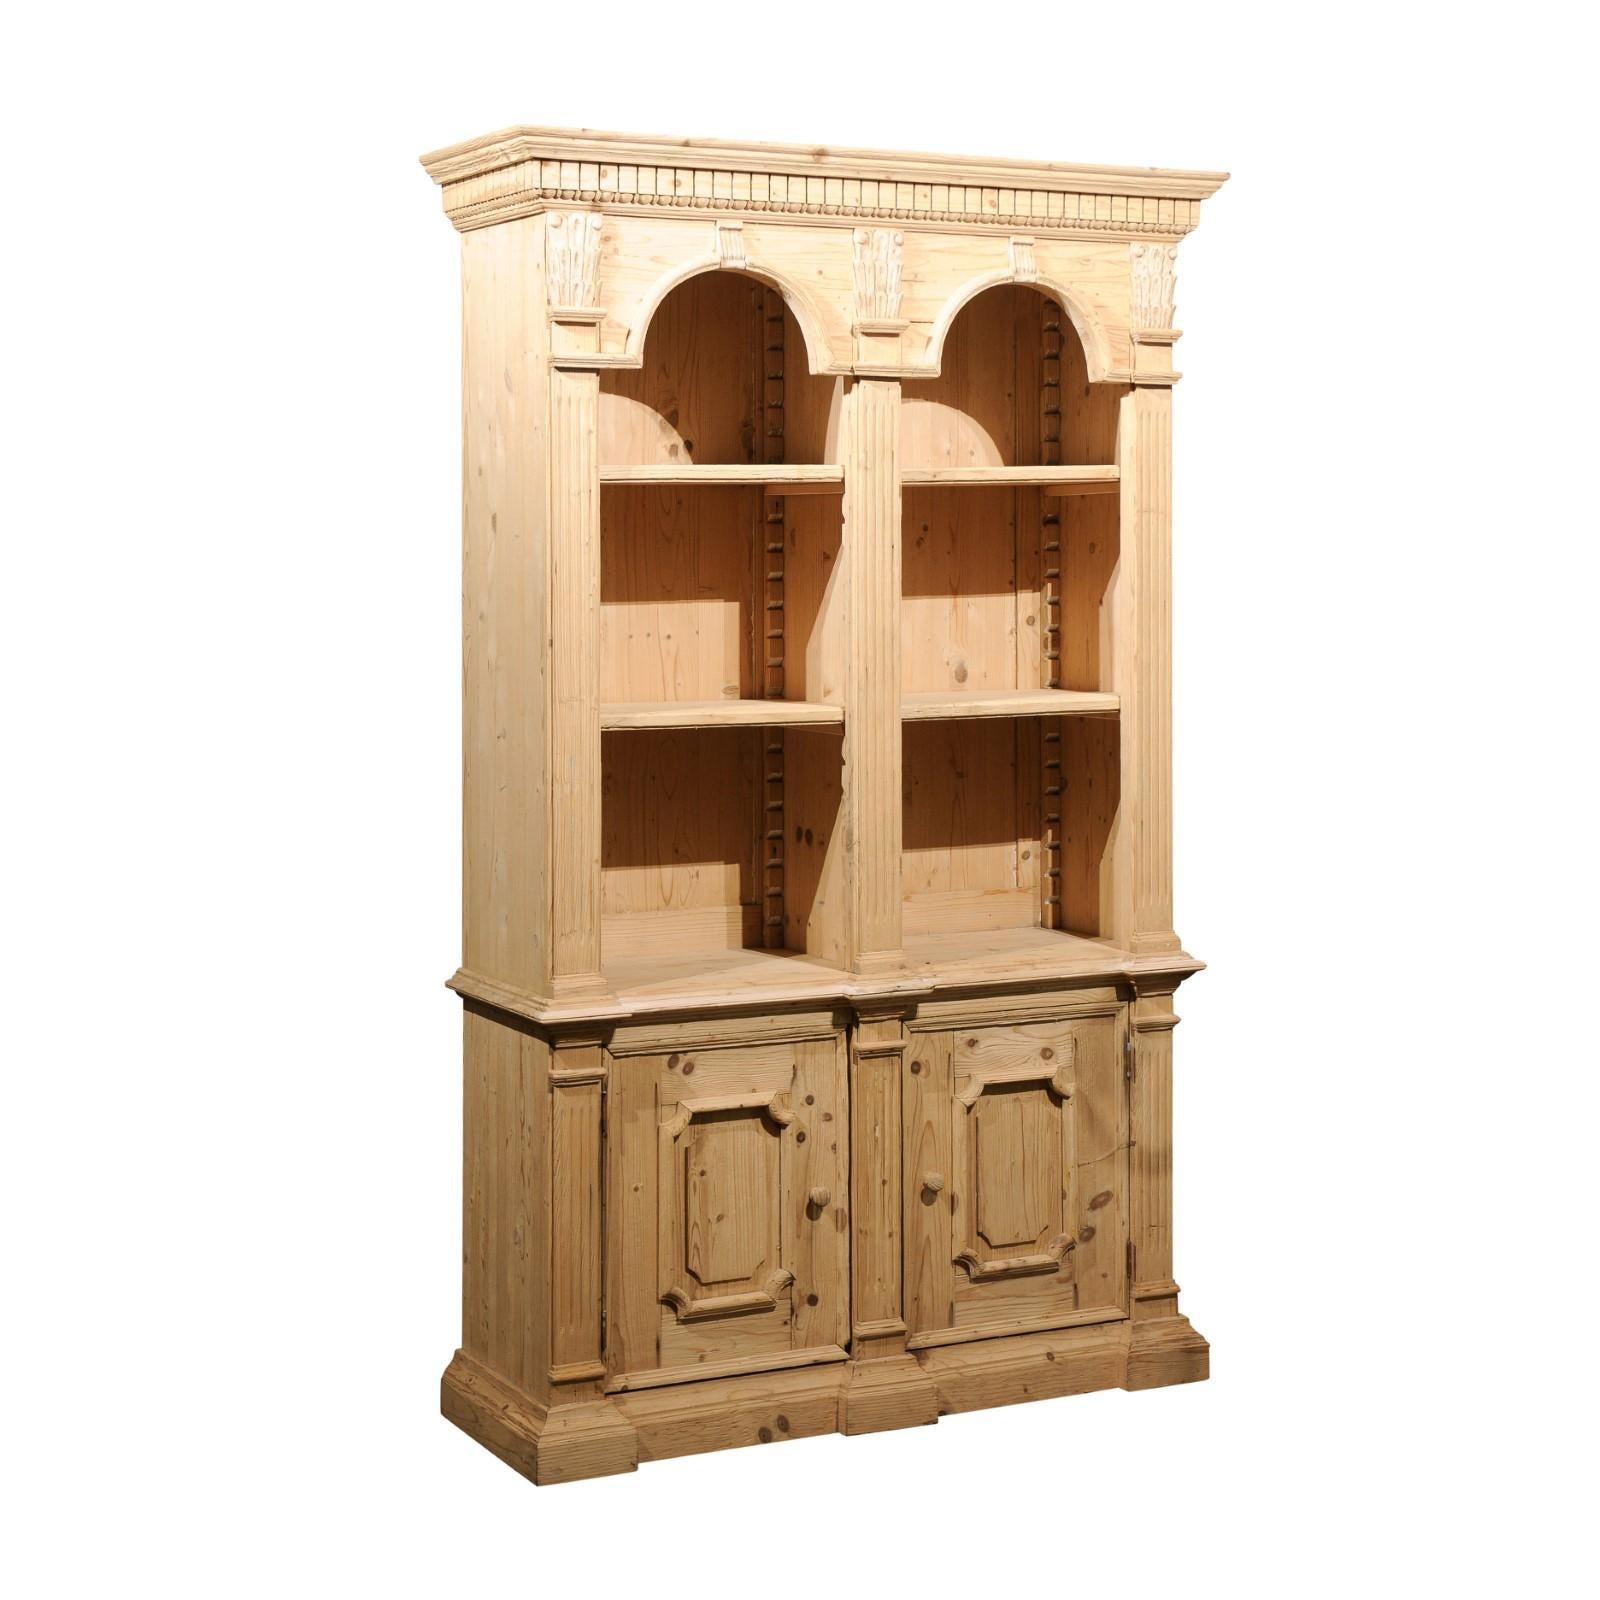 An Italian Turn of the Century Neoclassical style pine bookcase from the early 20th century with arched motifs, carved dentil, Corinthian and Doric capitals, fluted pilasters and molded doors. Created in Italy during the early years of the 20th